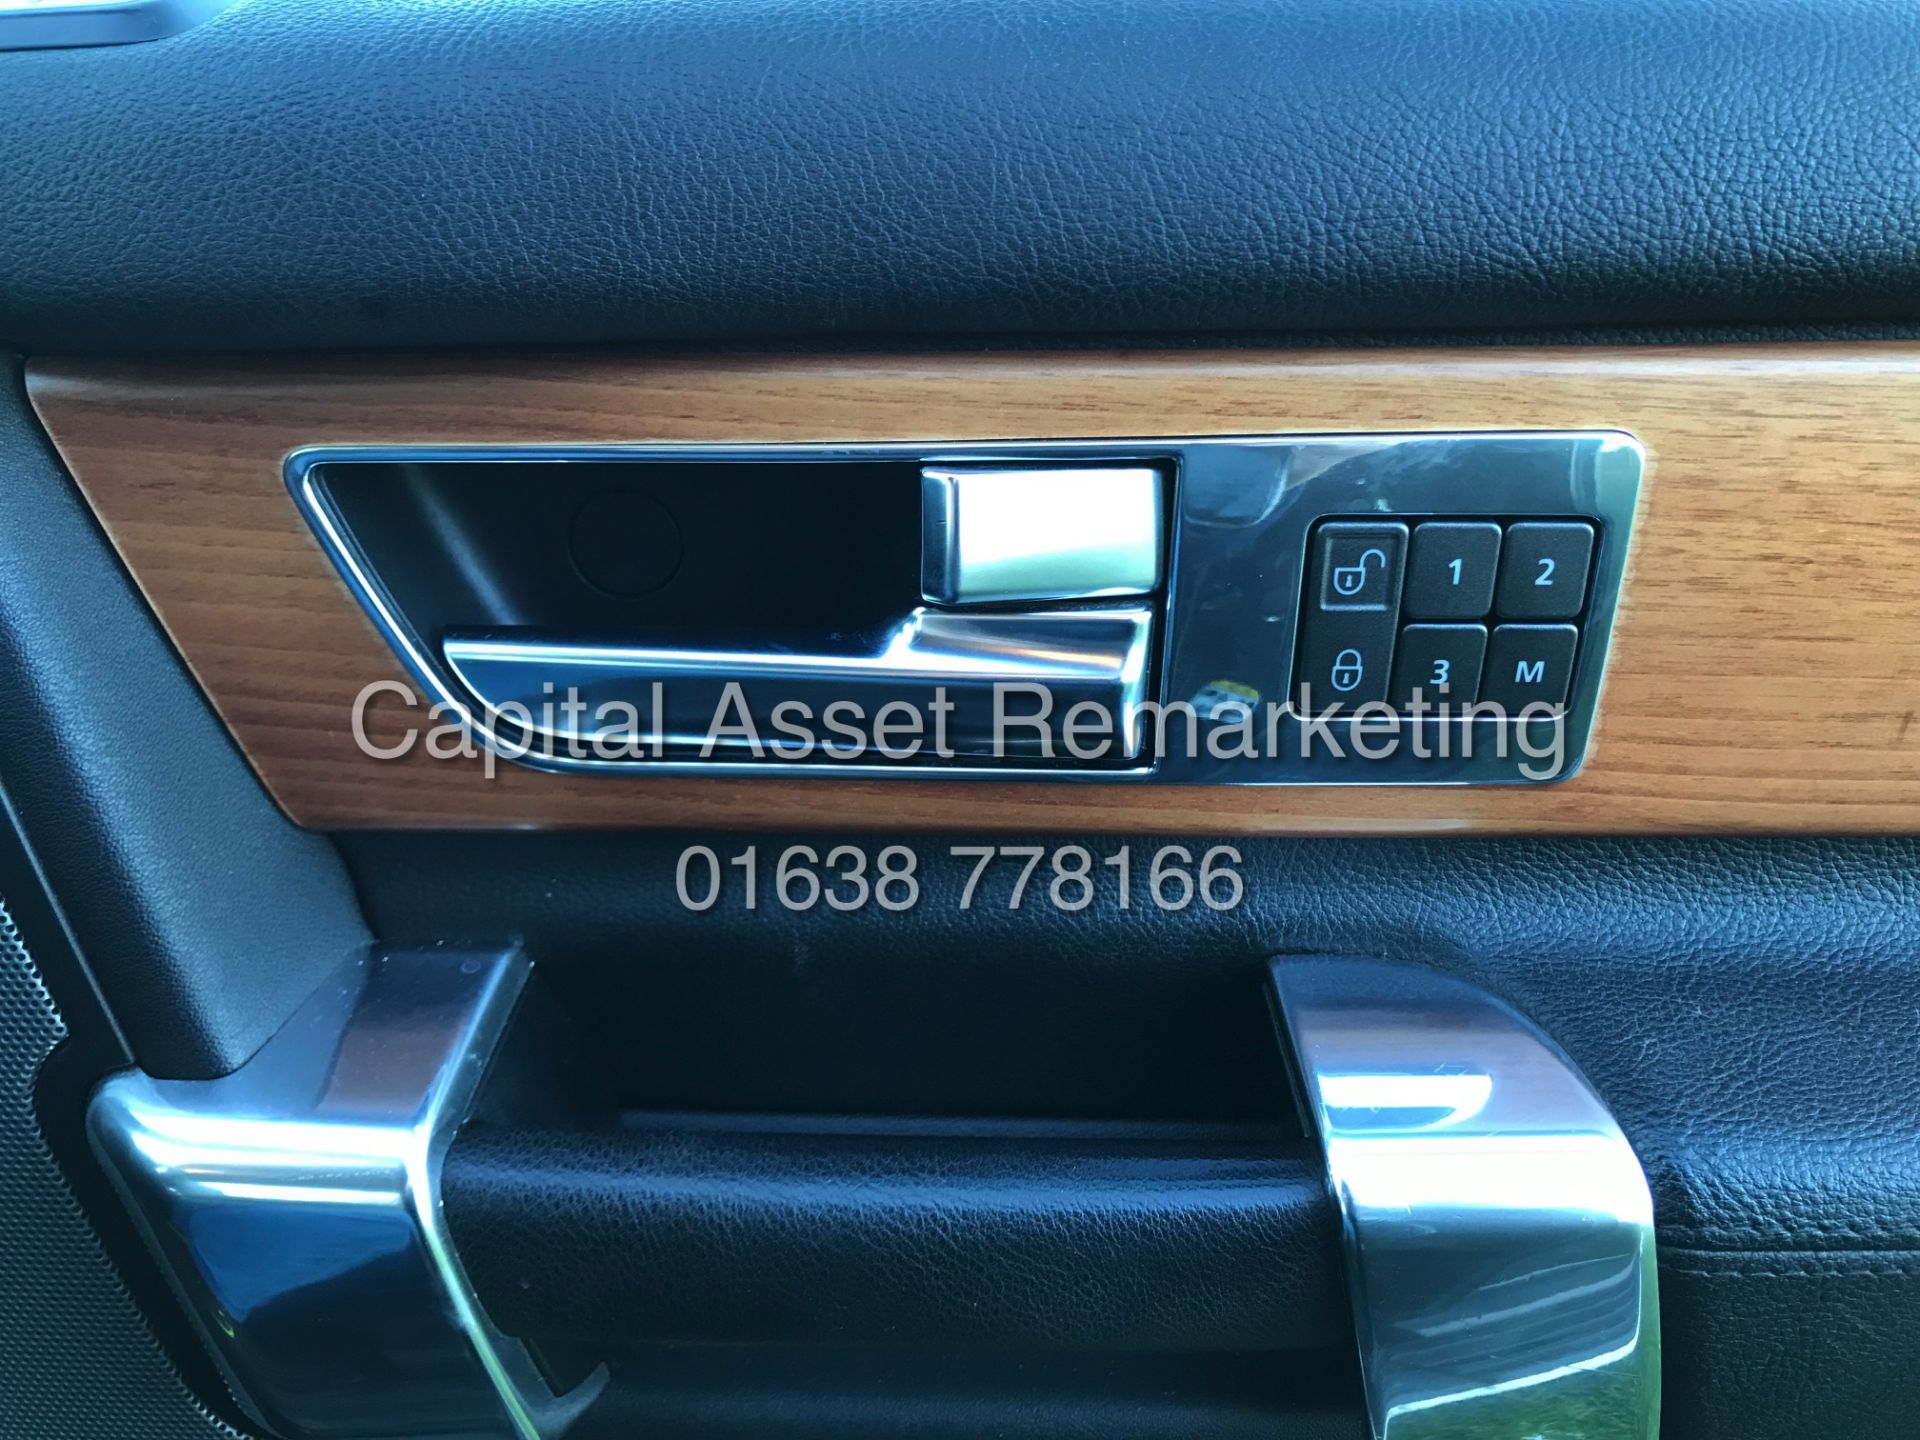 (ON SALE) LAND ROVER DISCOVERY 4 "HSE" 3.0 SDV6 AUTO (13 REG) 7 SEATER - TOP SPEC - SAT NAV -LEATHER - Image 22 of 31